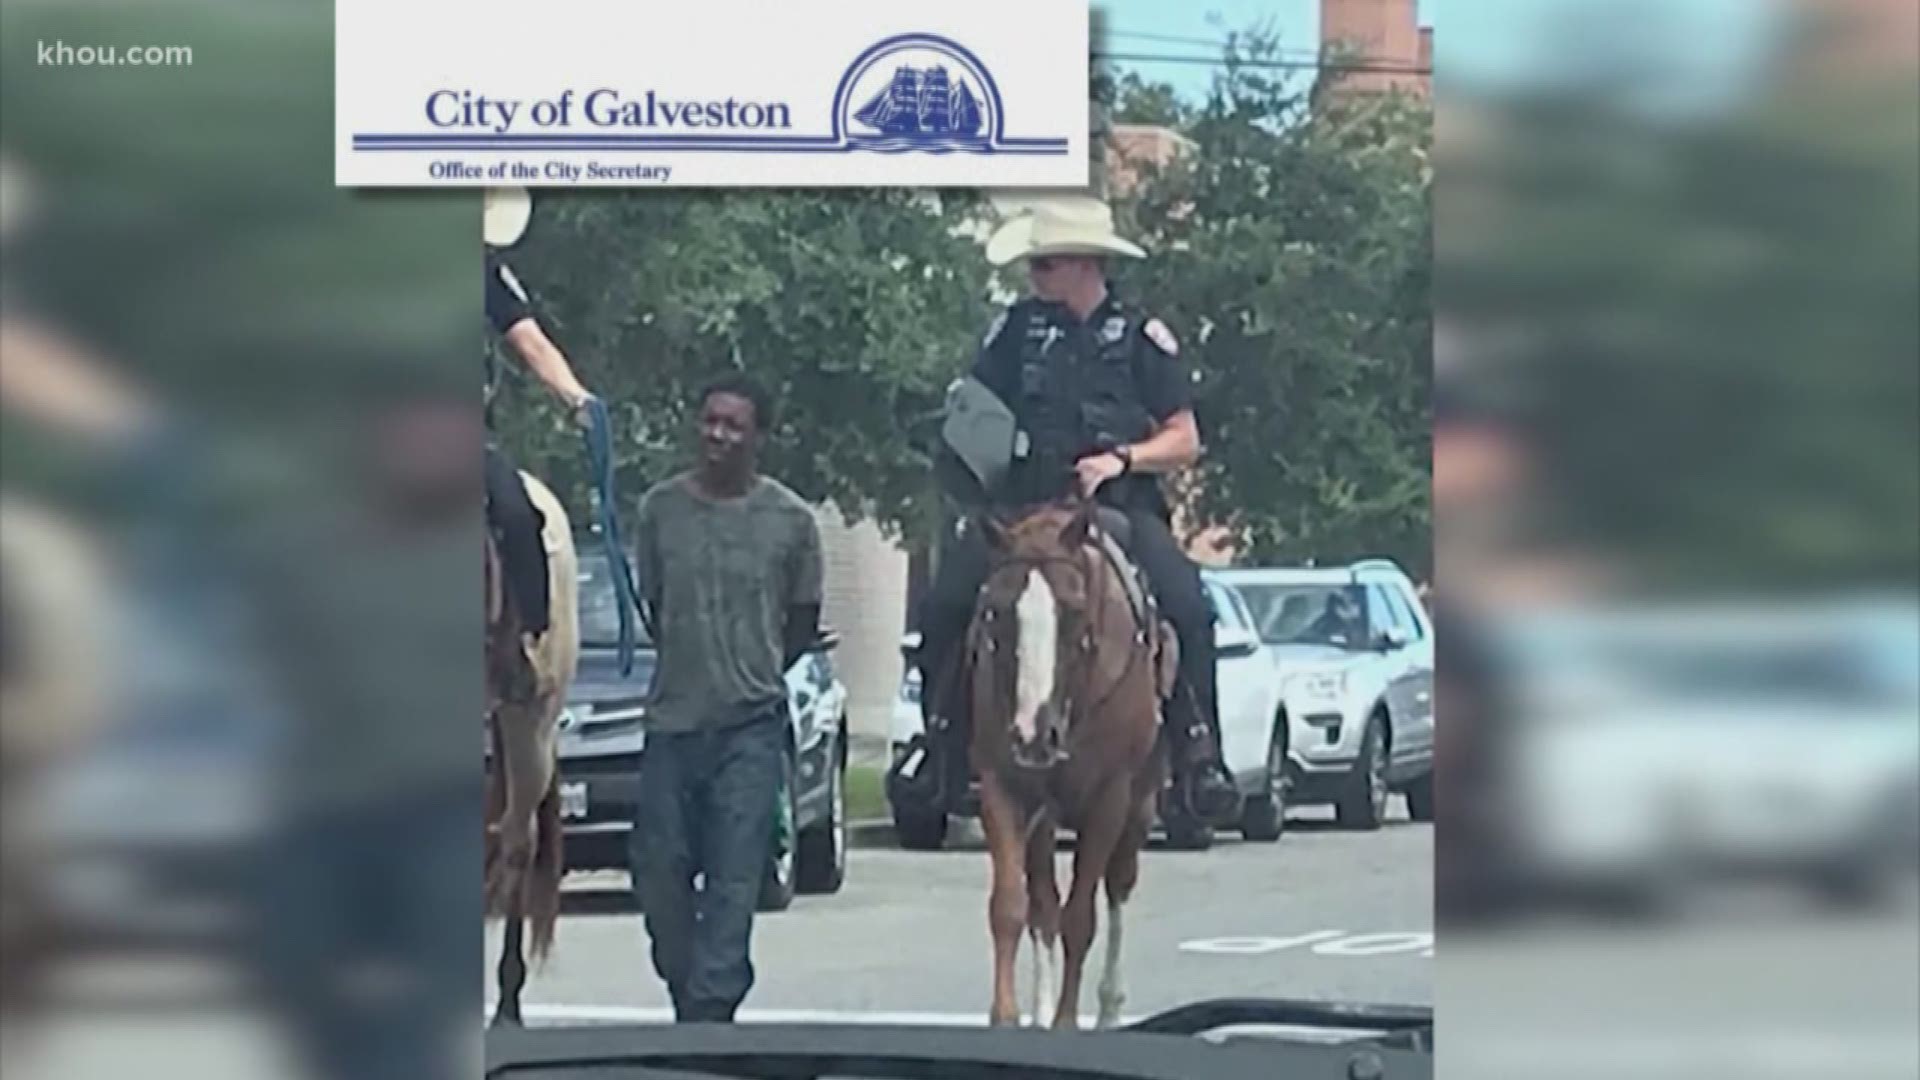 The city of Galveston is asking the Texas Attorney General to prevent the release of the officers’ body camera video in the controversial arrest of Donald Neely by Galveston mounted patrol officers.